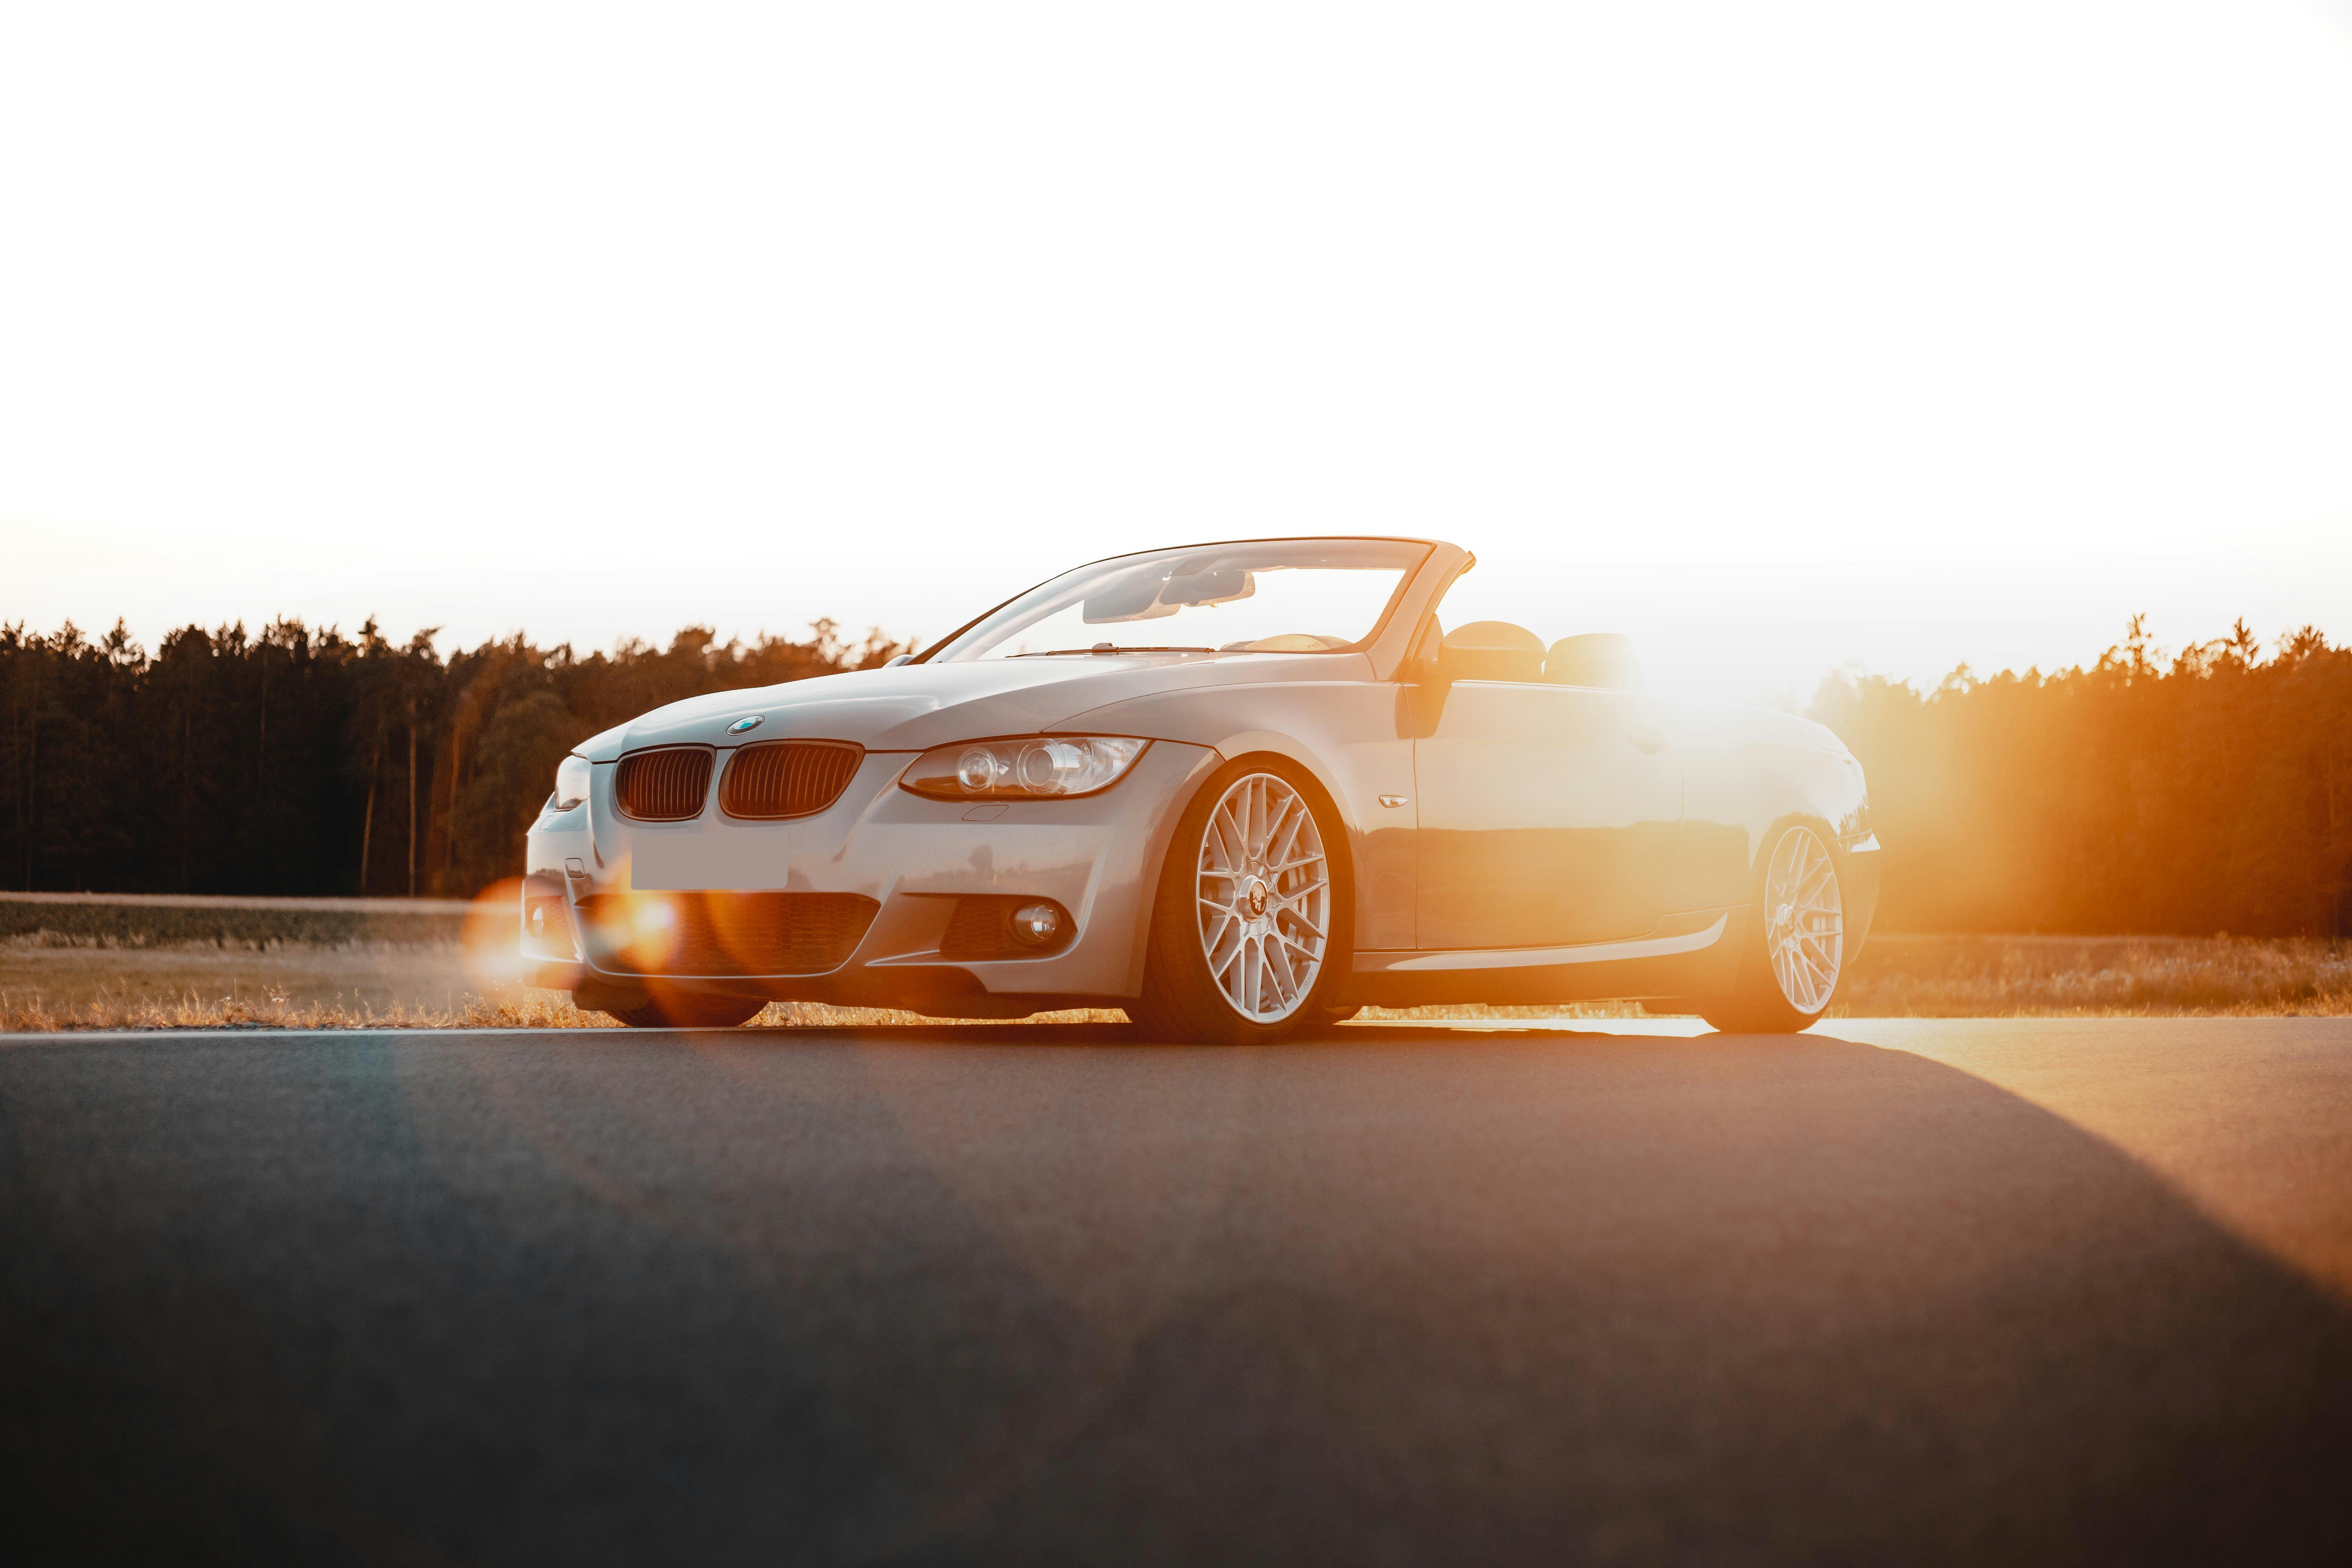 BMW 330d in the sunset